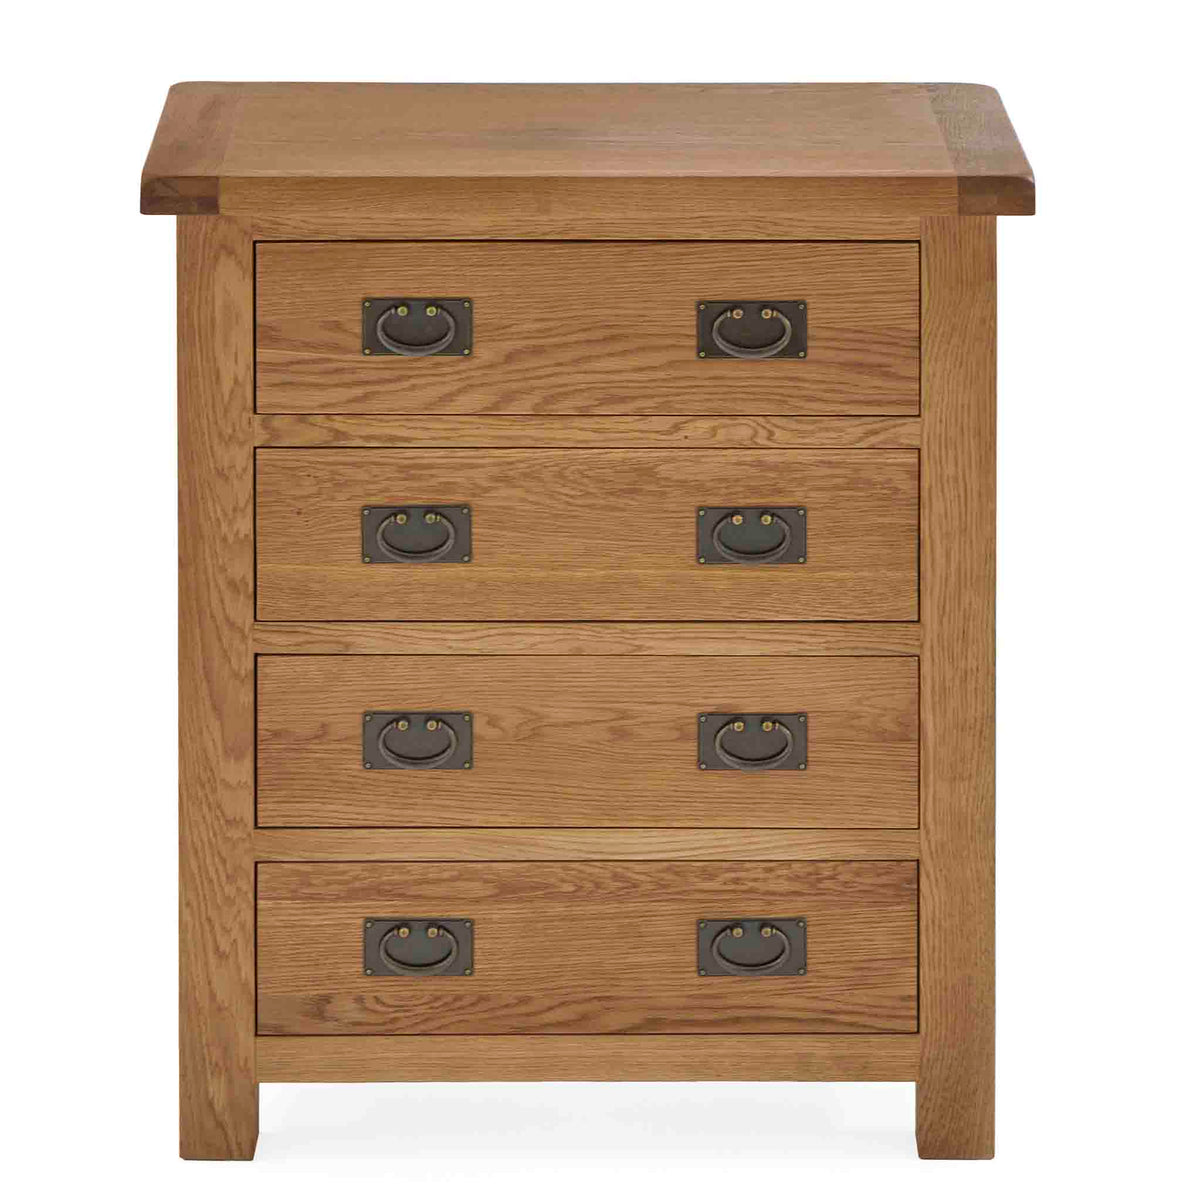 Zelah Oak 4 Drawer Chest - Front view showing top